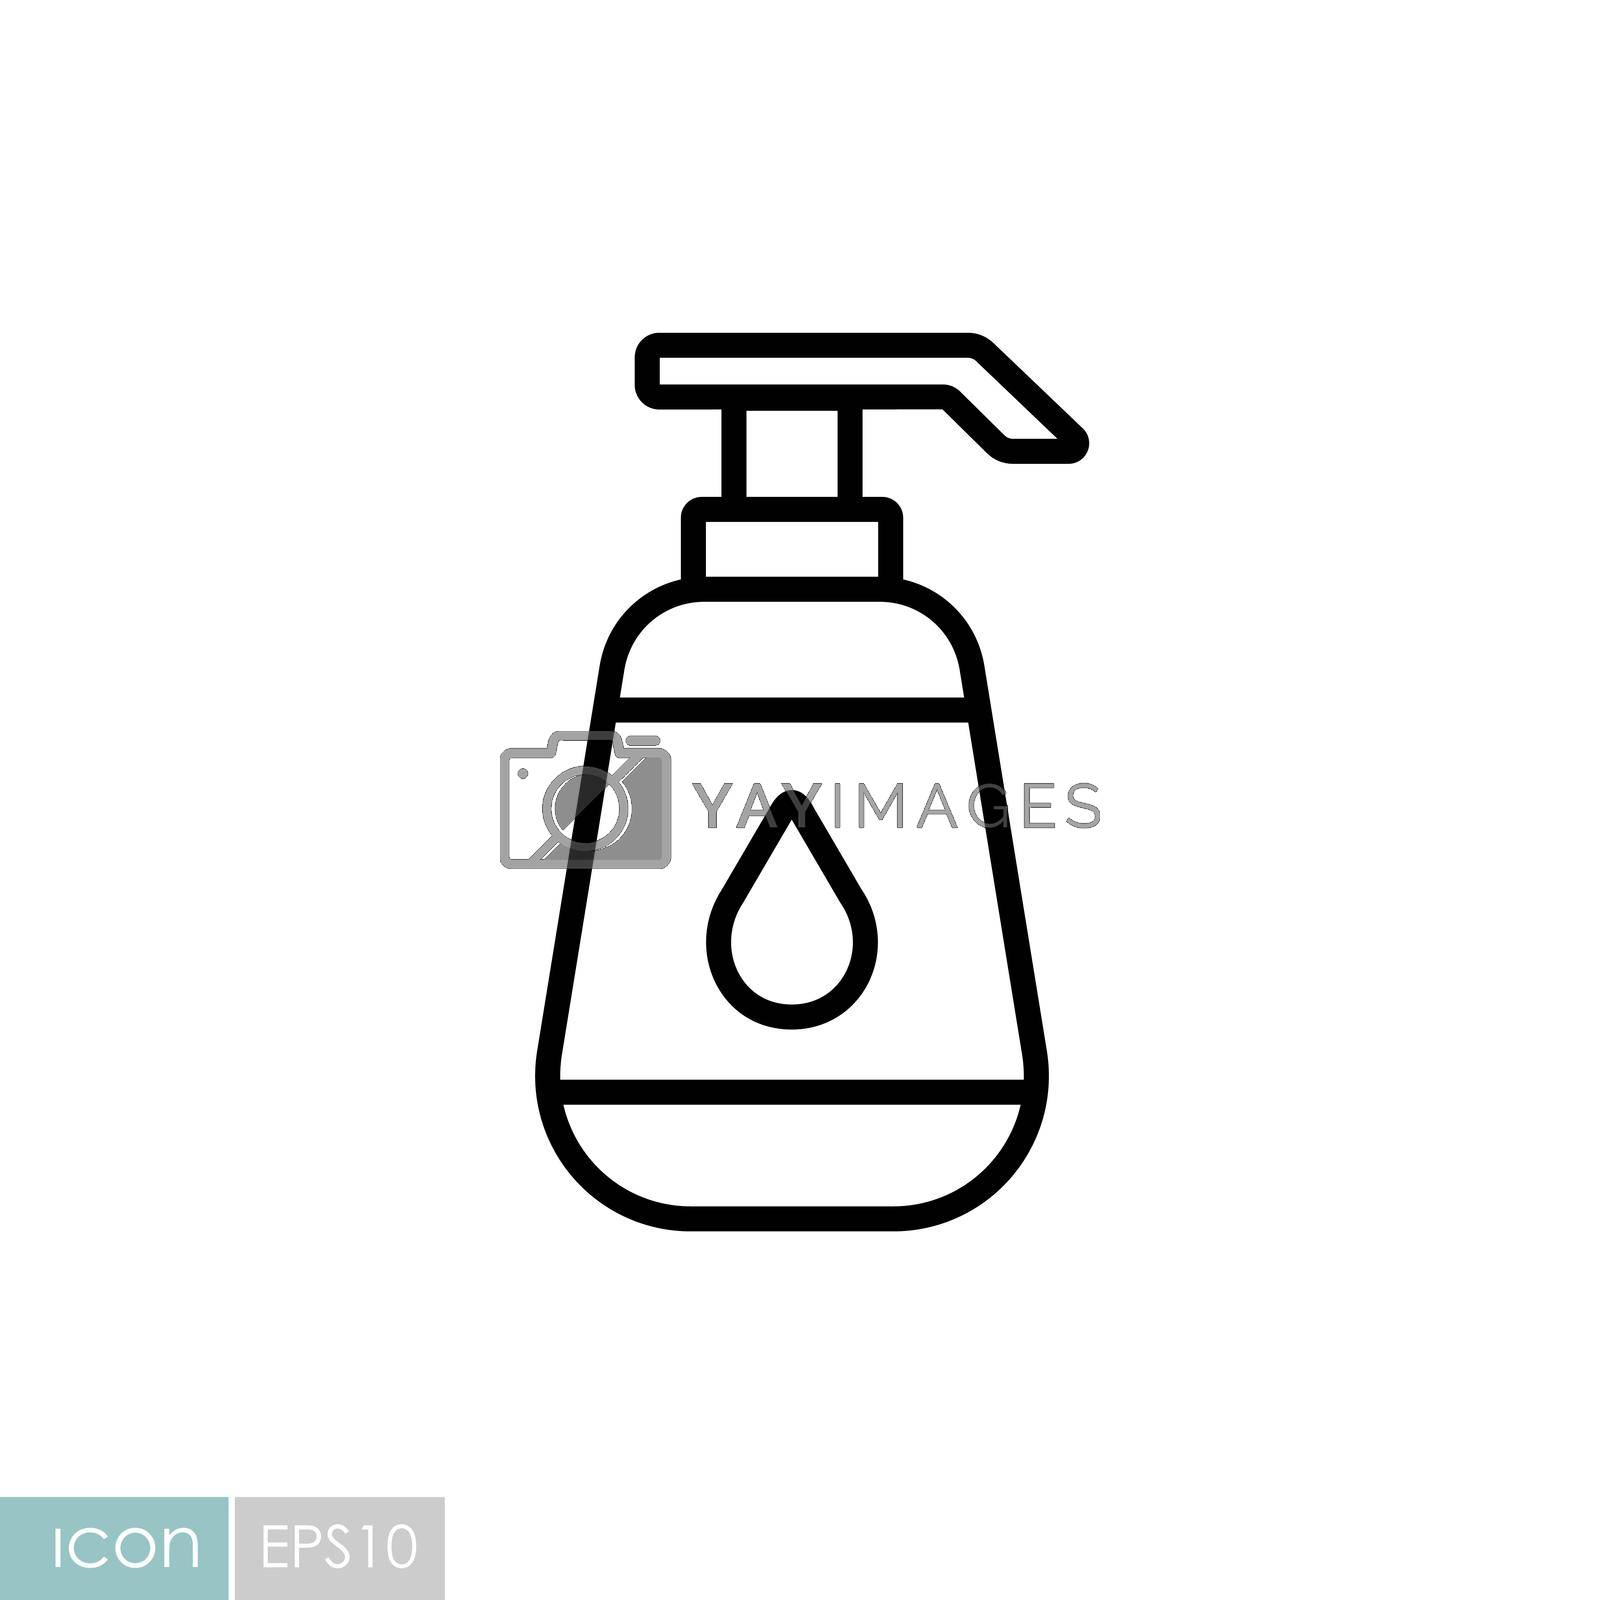 Nursery baby lotion bottle vector icon. Graph symbol for children and newborn babies web site and apps design, logo, app, UI